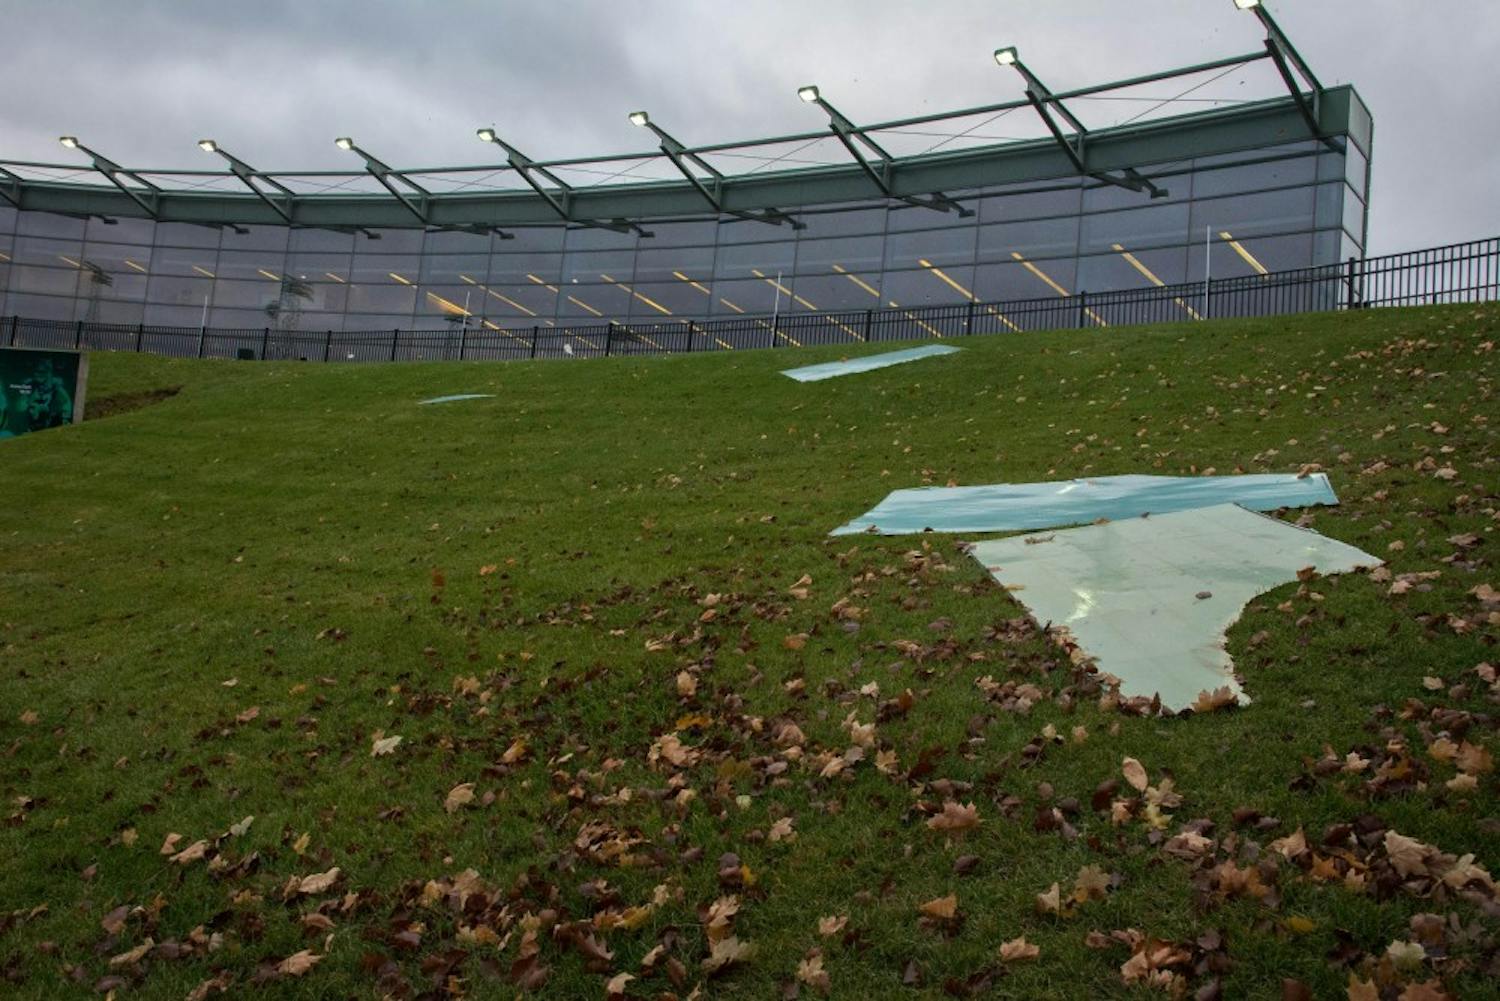 Photo by Sage StephensSome of the debris made it to the hill in Rynearson Stadium, but did not make it as far as the field.